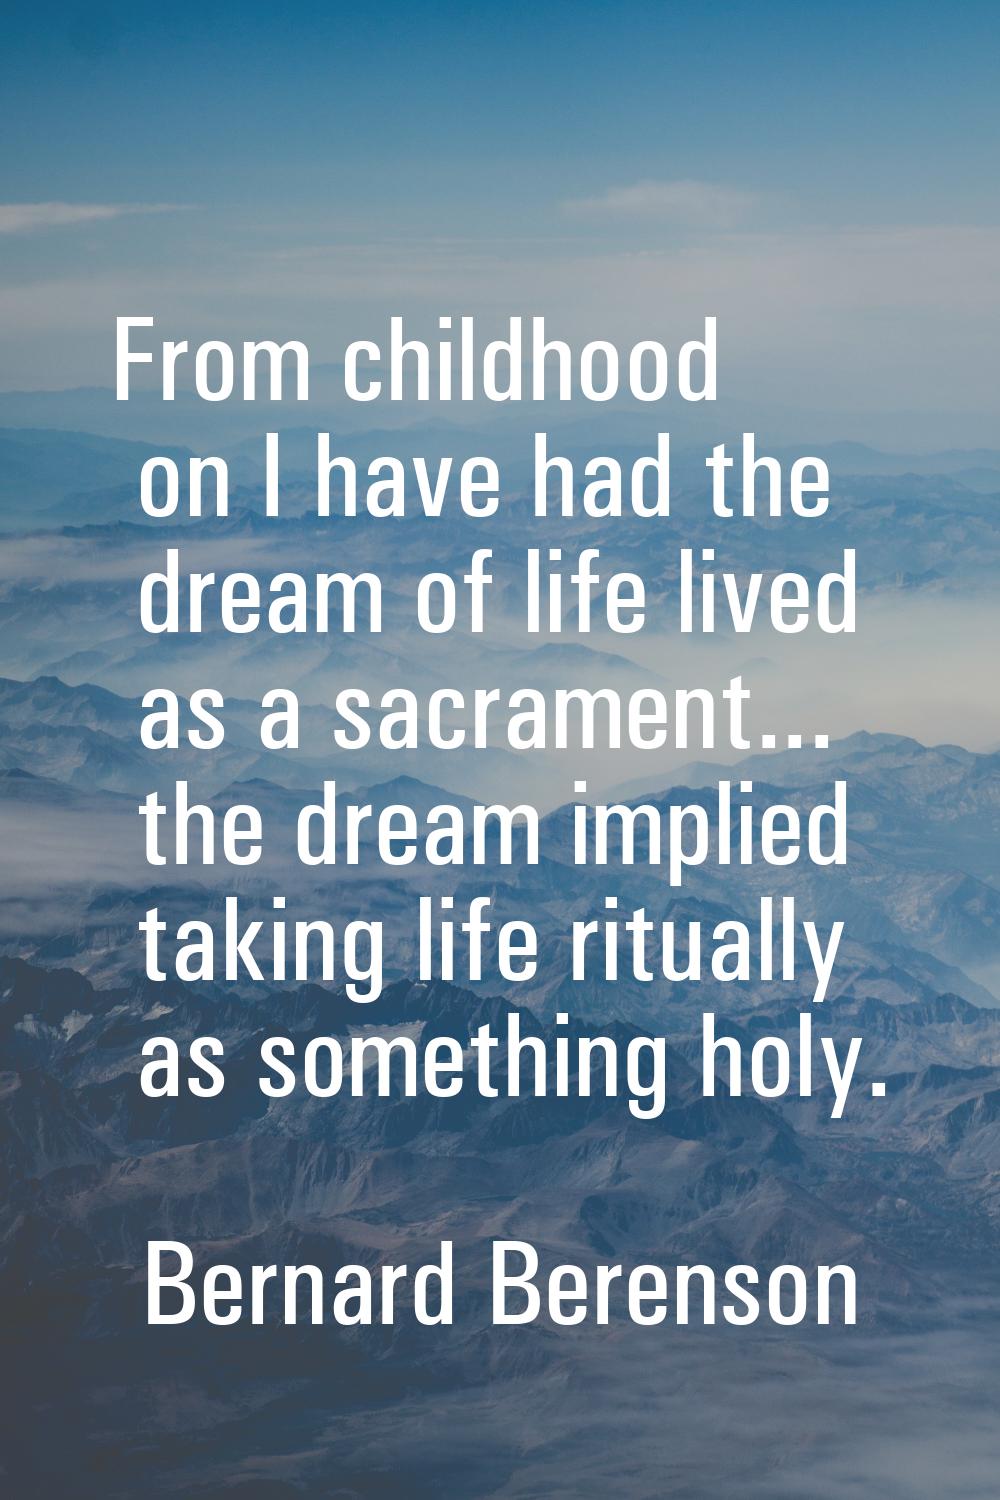 From childhood on I have had the dream of life lived as a sacrament... the dream implied taking lif